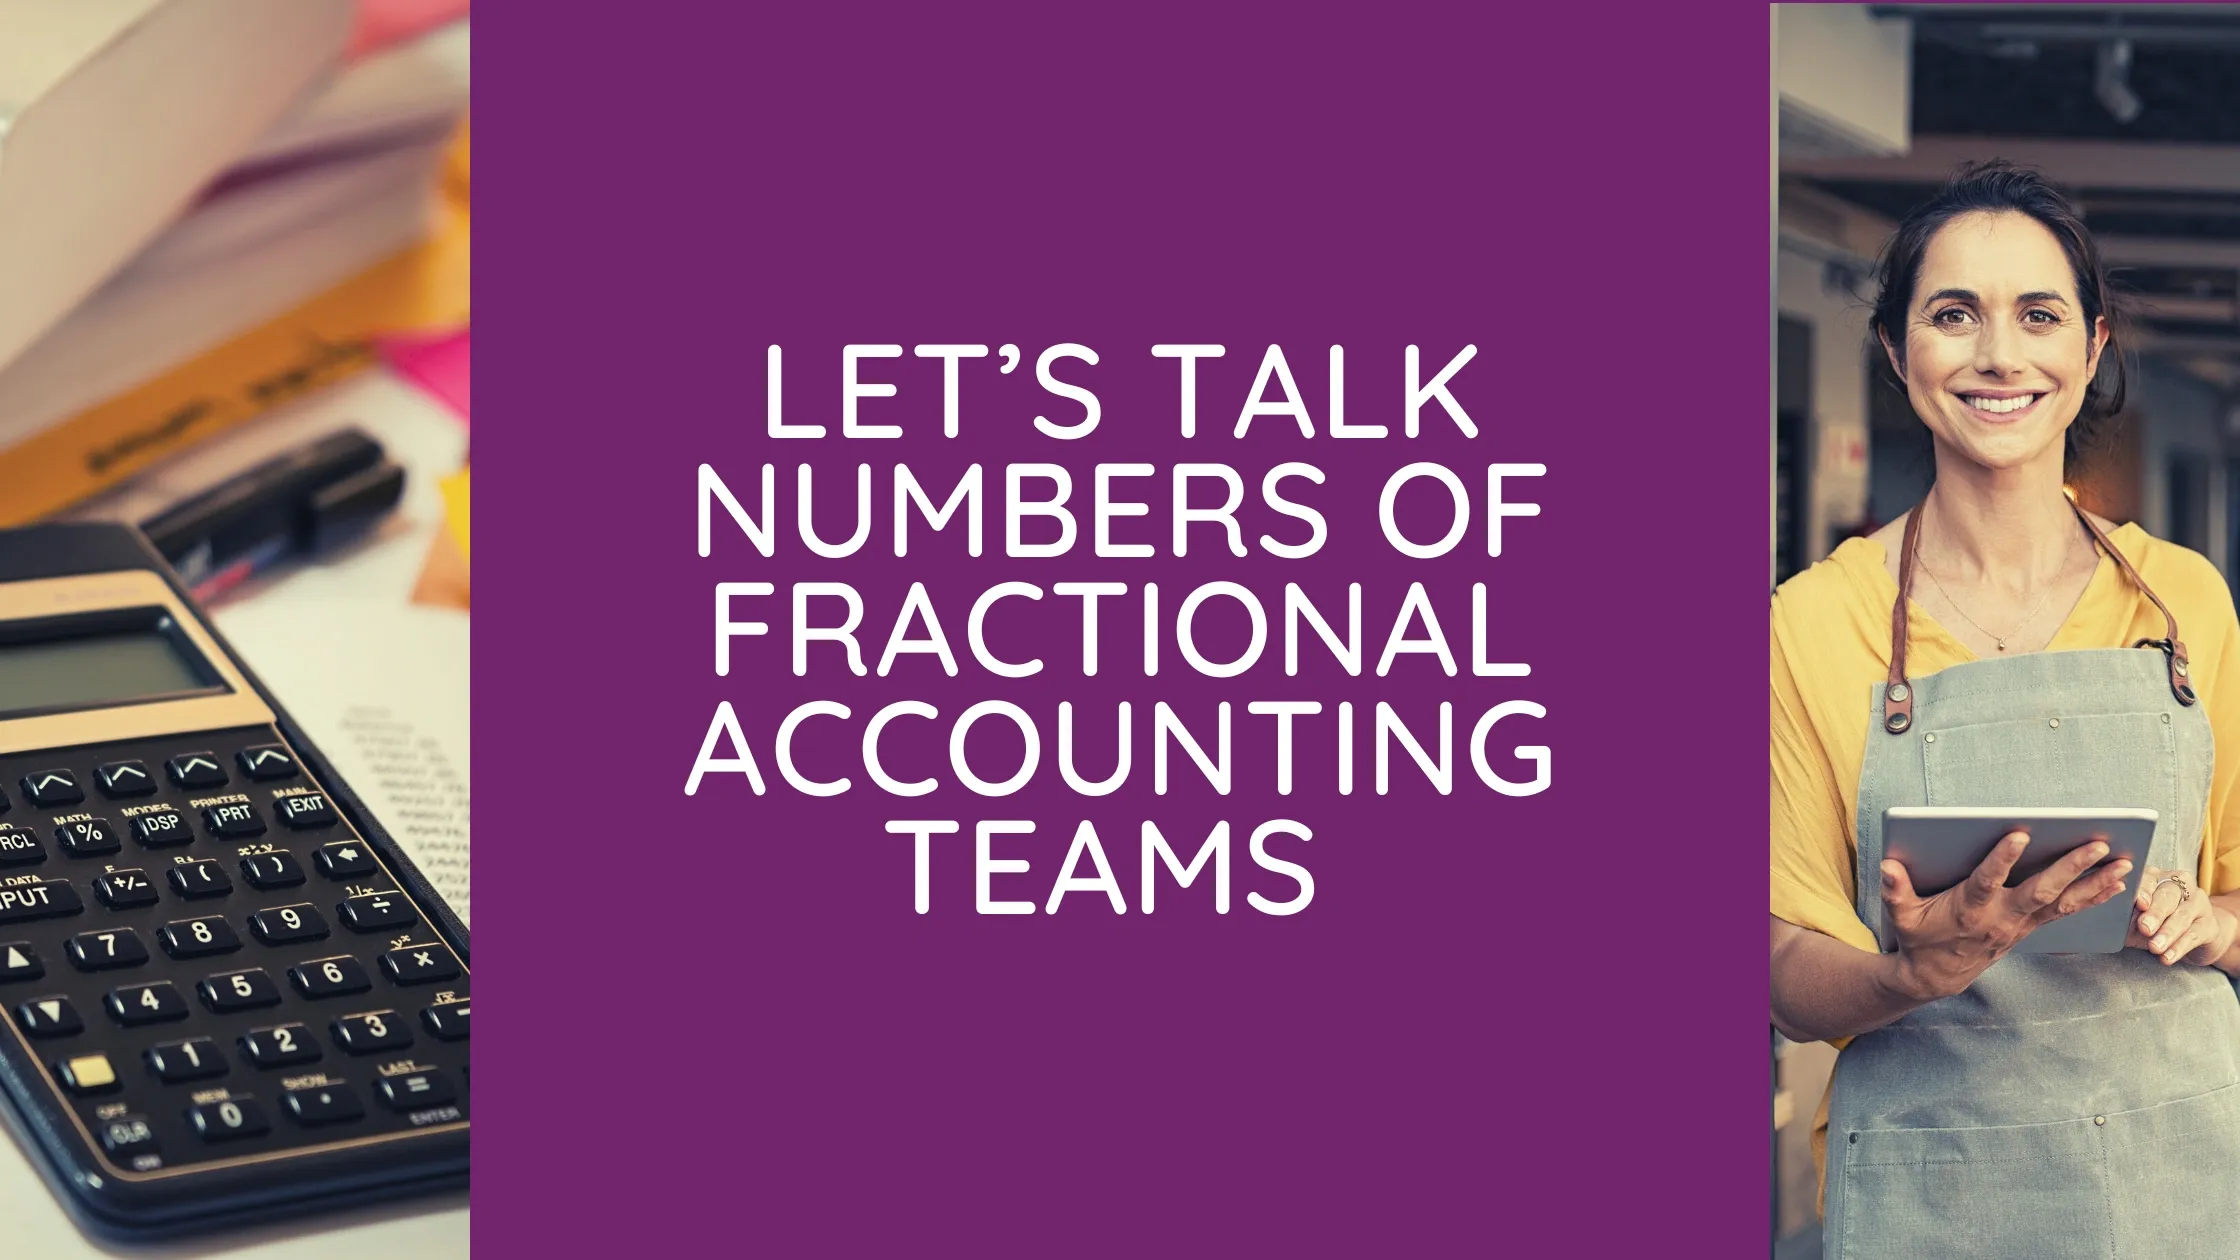 Let's Talk Fractional Accounting